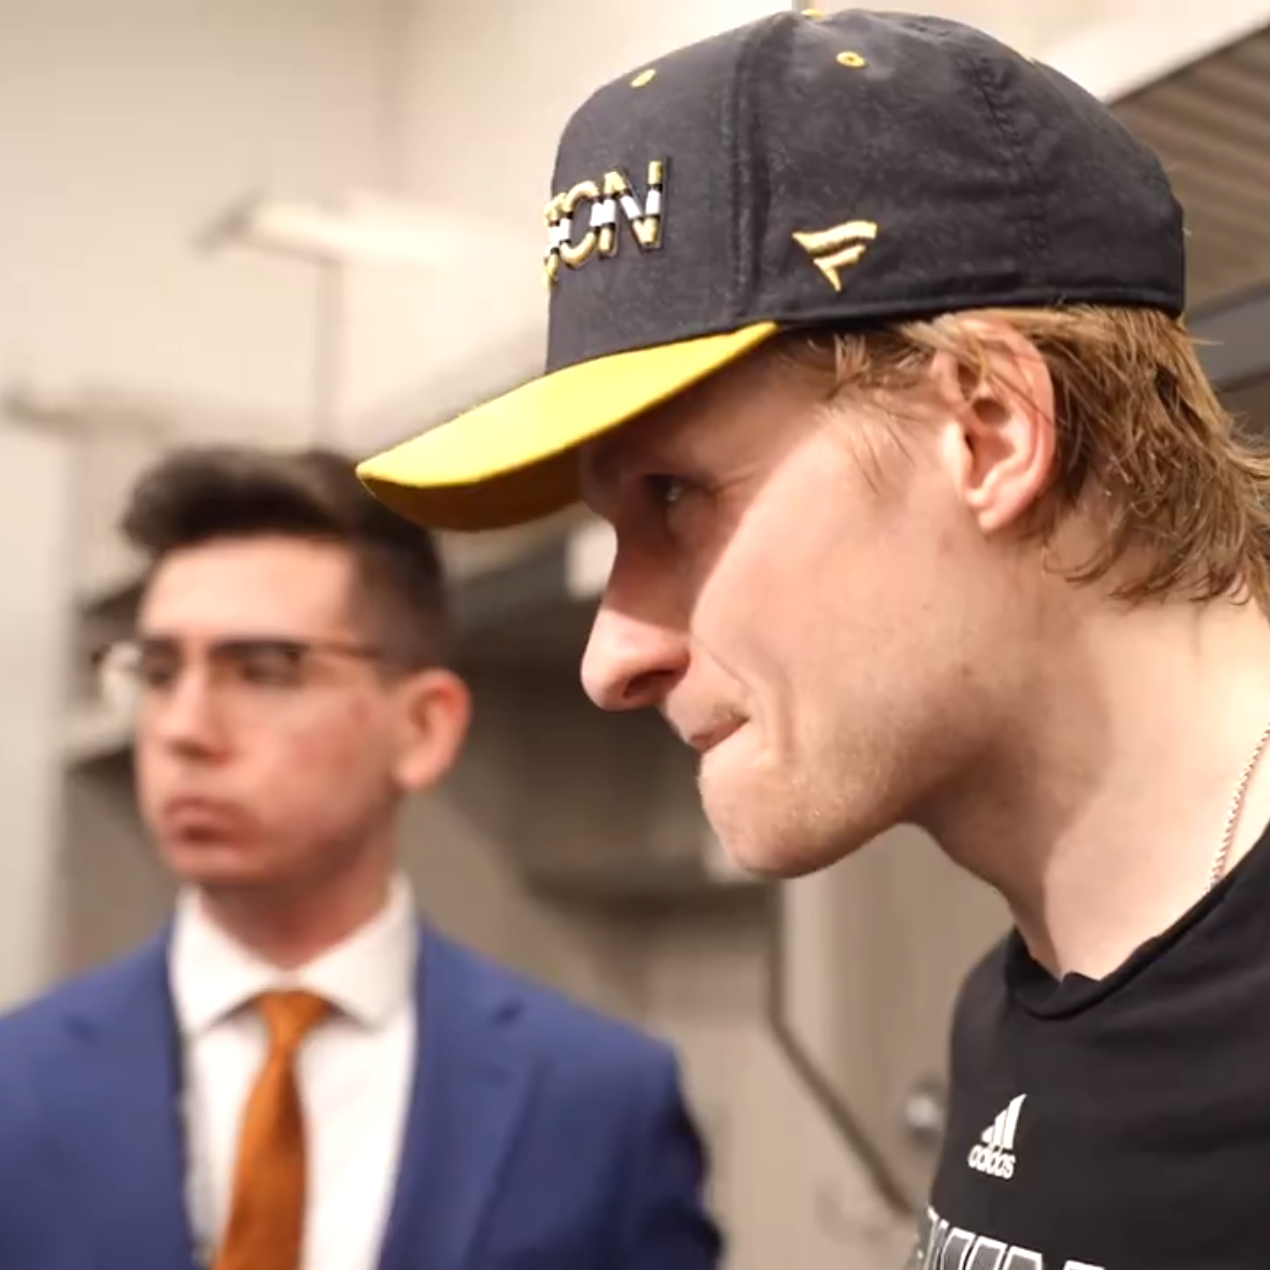 Cody, a white male in a white shirt, blue blazer, and orange tie, stands behind Boston Bruins player Danton Heinen, a white male wearing a black Bruins hat, during a postgame media scrum in the visiting locker room at Wells Fargo Center in Philadelphia, Pennsylvania.